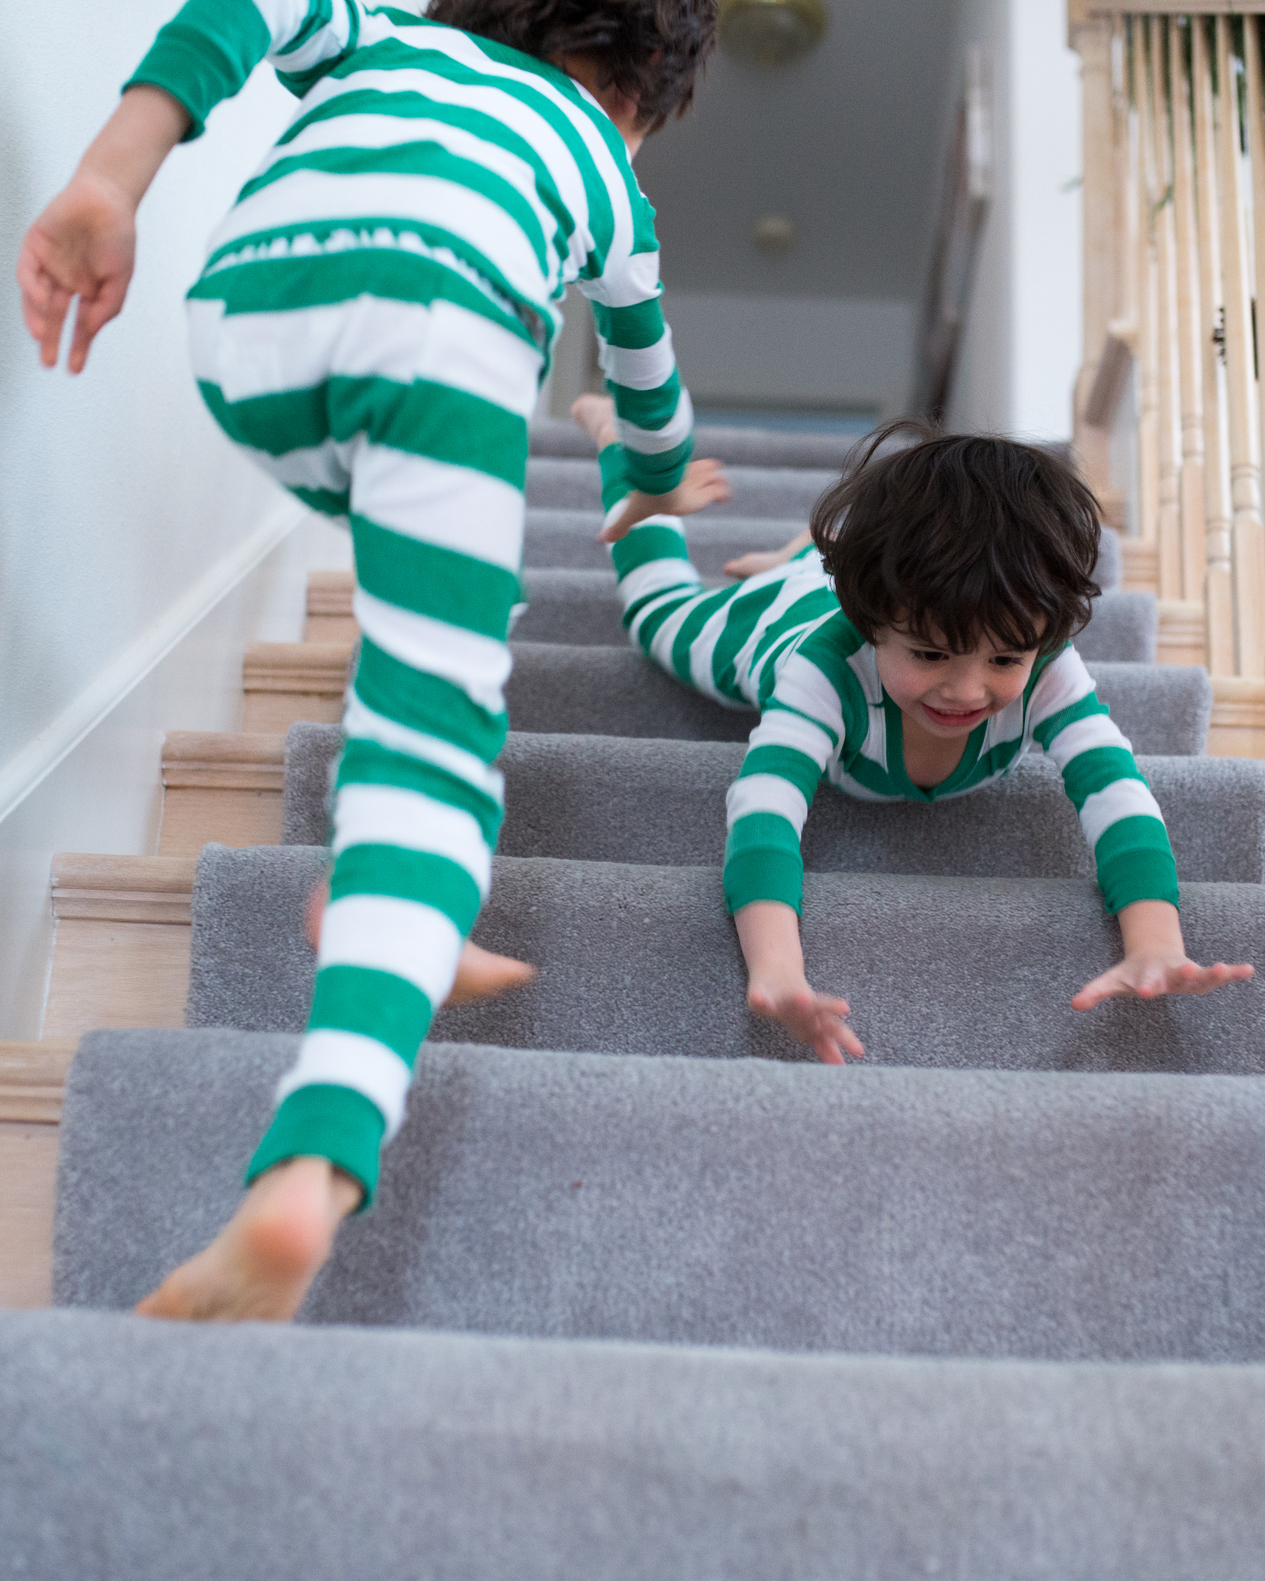 Siblings in pajamas playing by the stairs